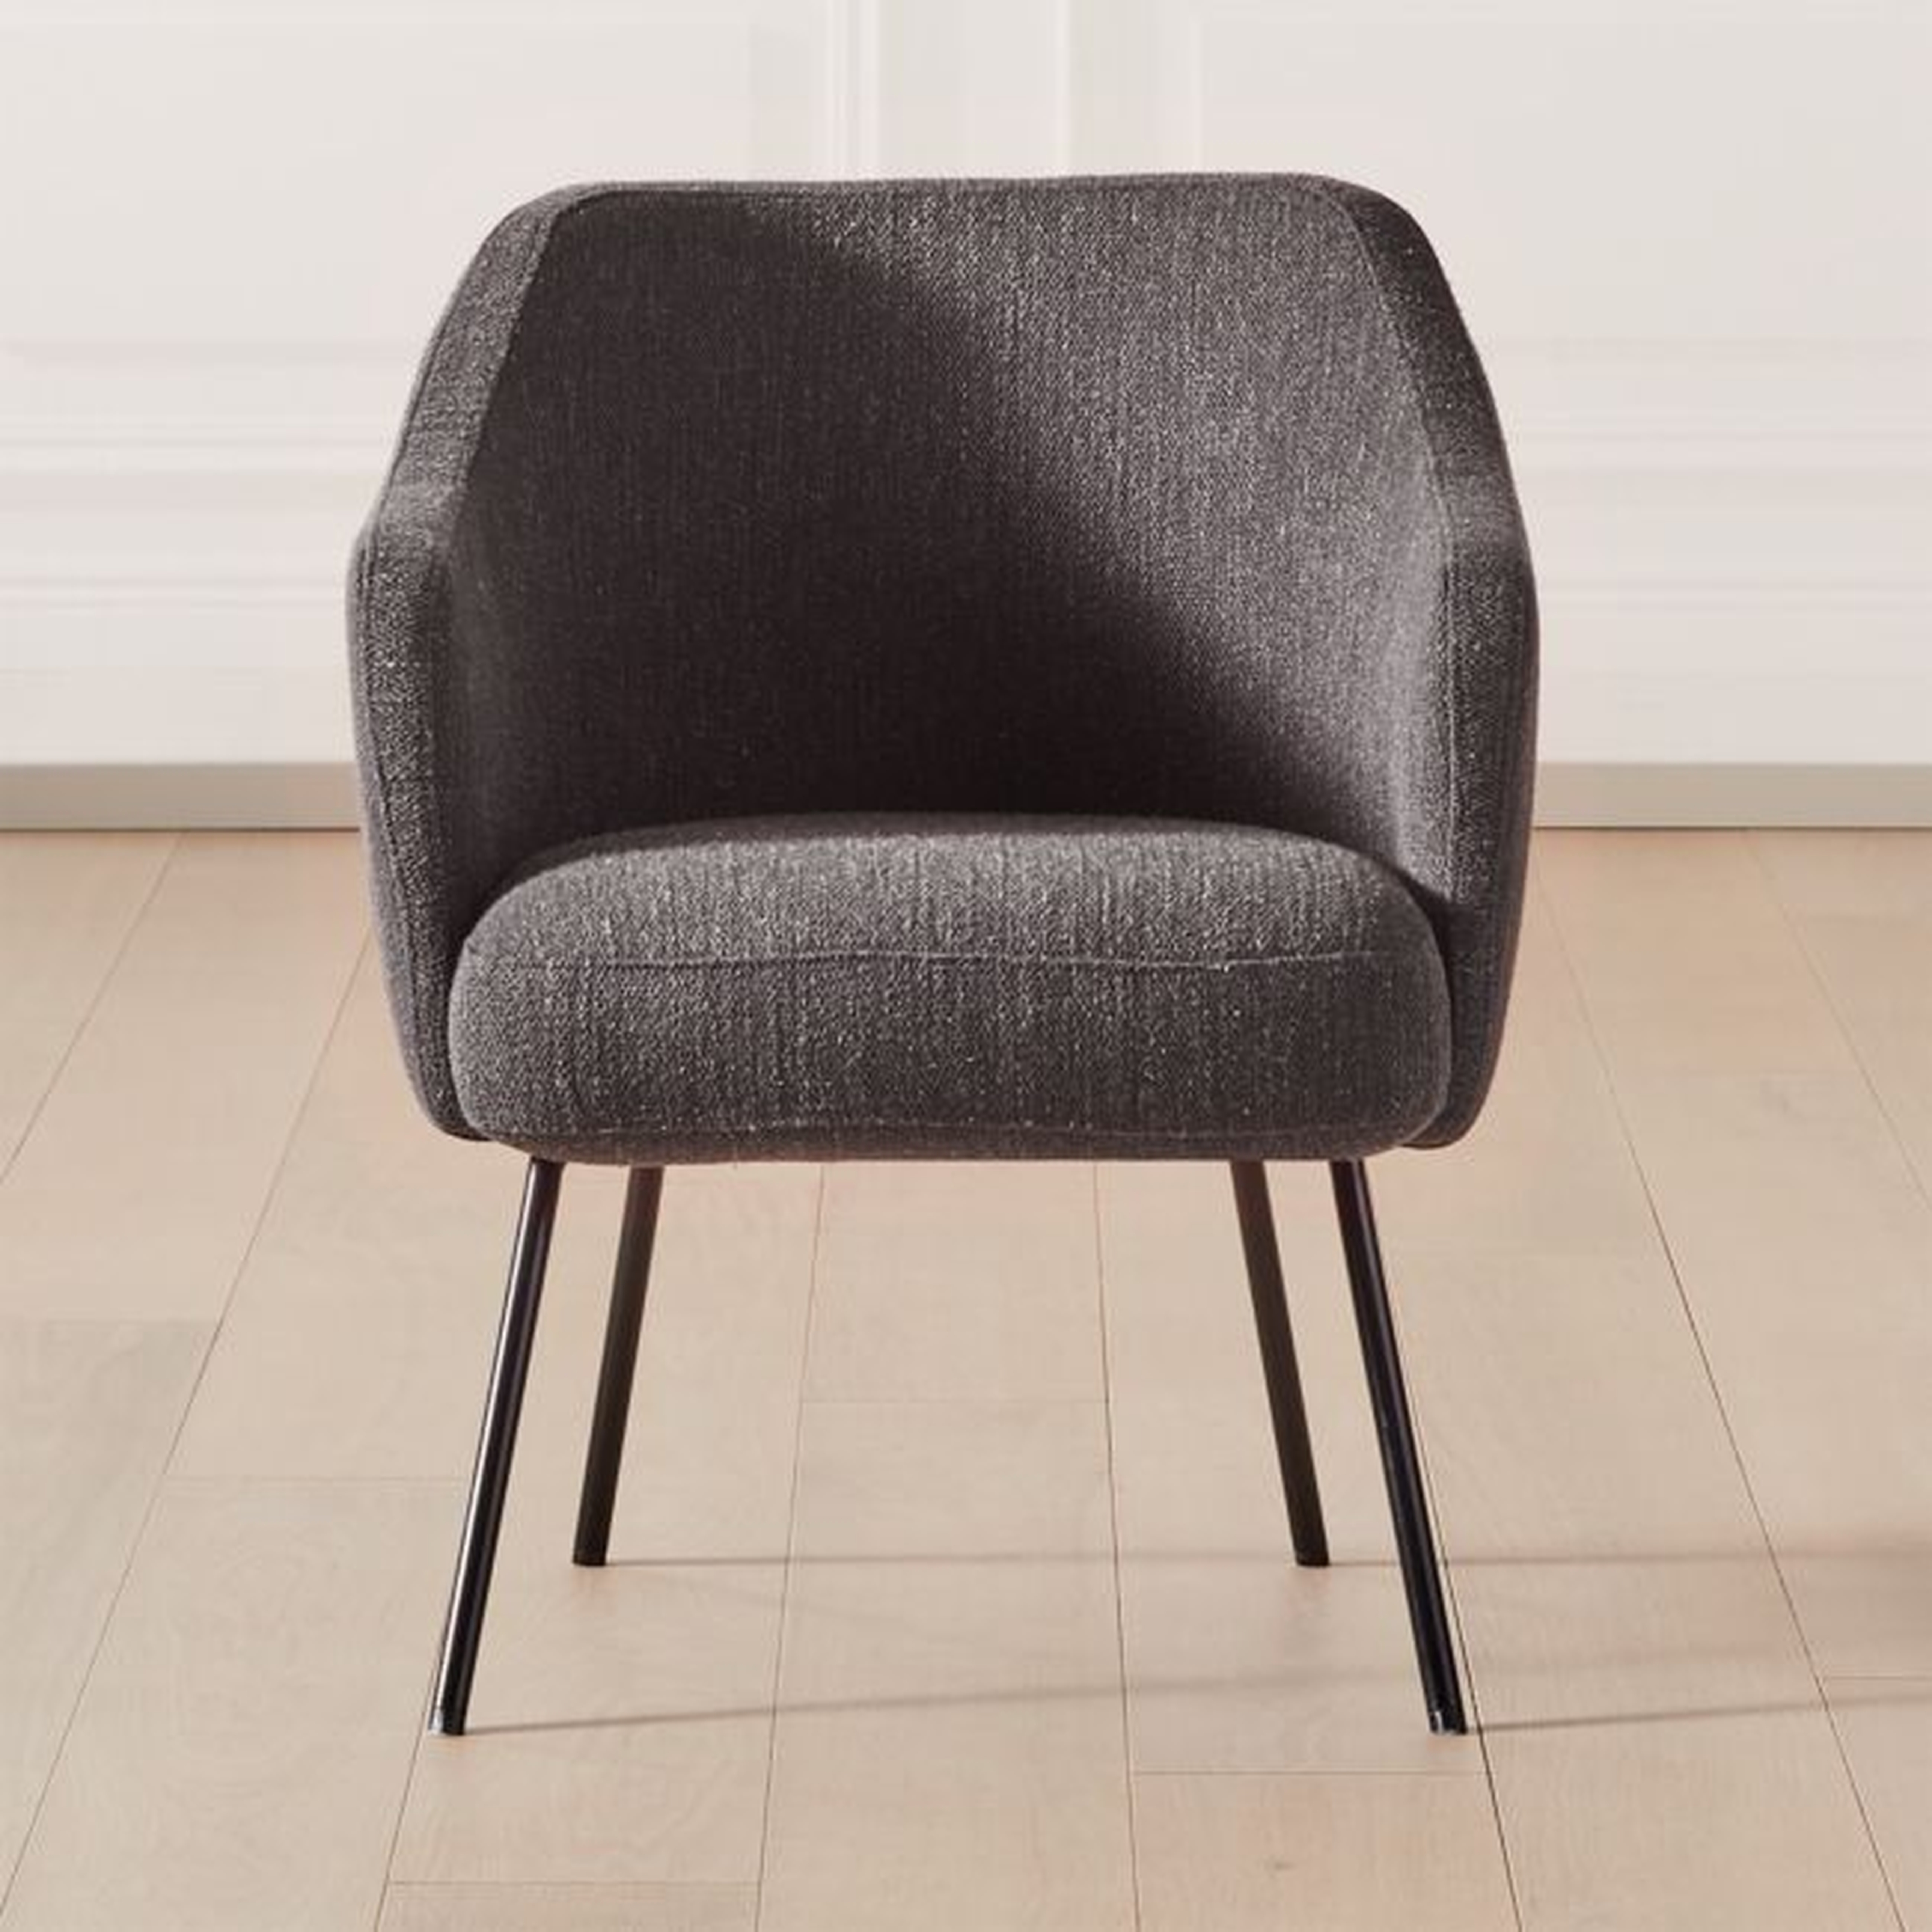 Chelsea Home Office Chair - CB2